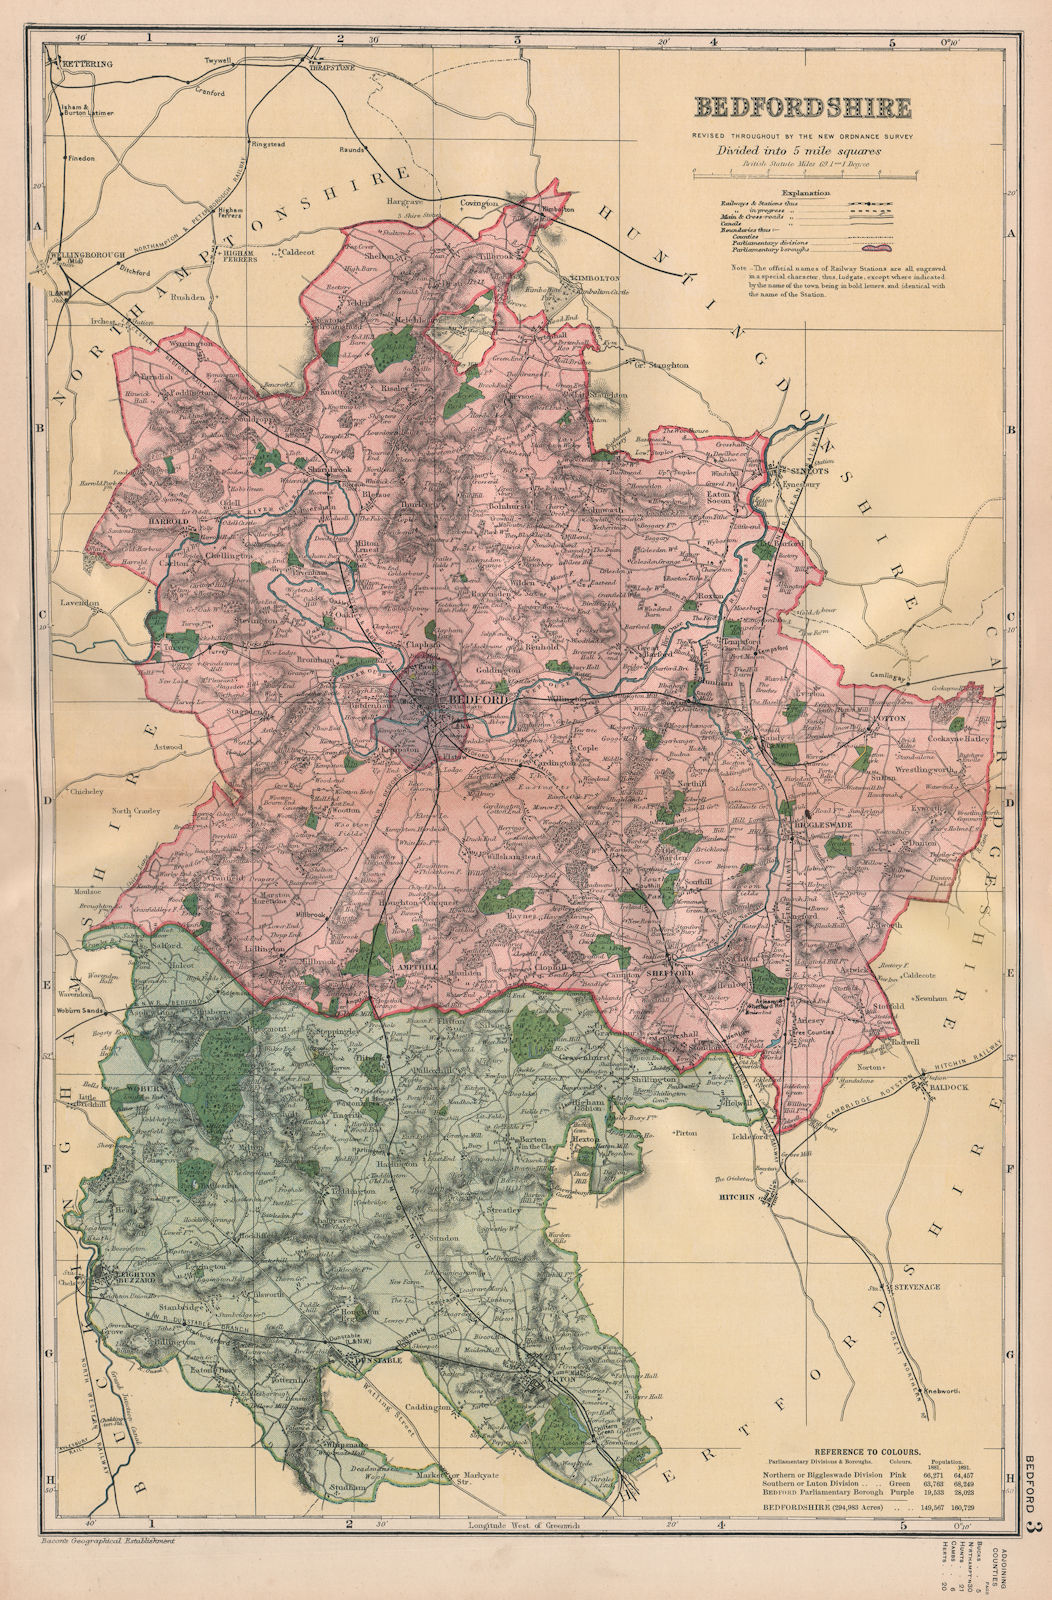 Associate Product BEDFORDSHIRE. Showing Parliamentary divisions, boroughs & parks. BACON 1896 map